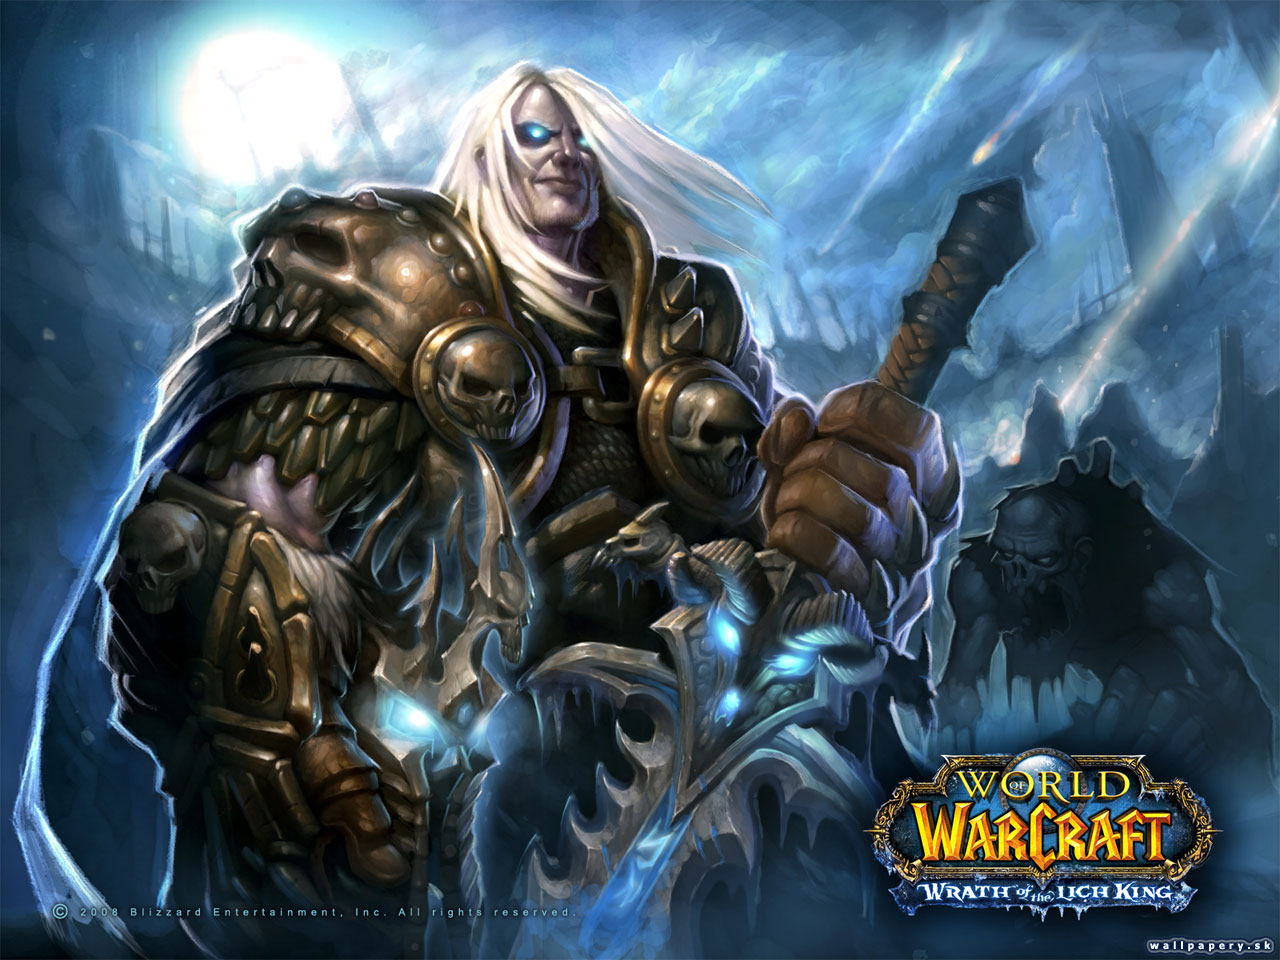 World of Warcraft: Wrath of the Lich King - wallpaper 10